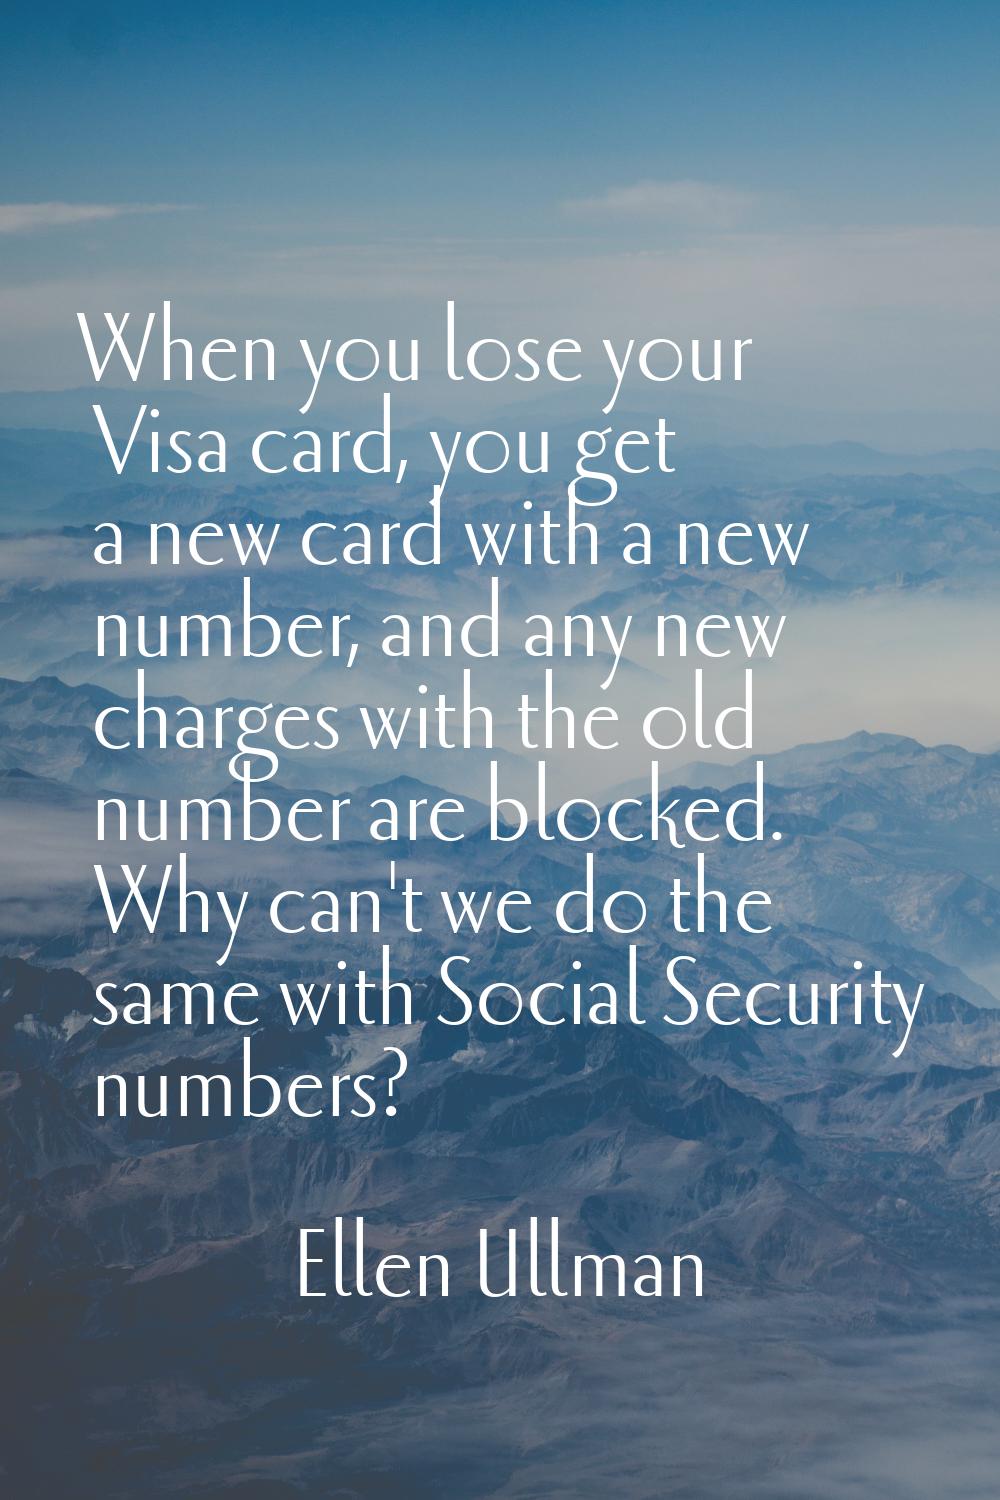 When you lose your Visa card, you get a new card with a new number, and any new charges with the ol